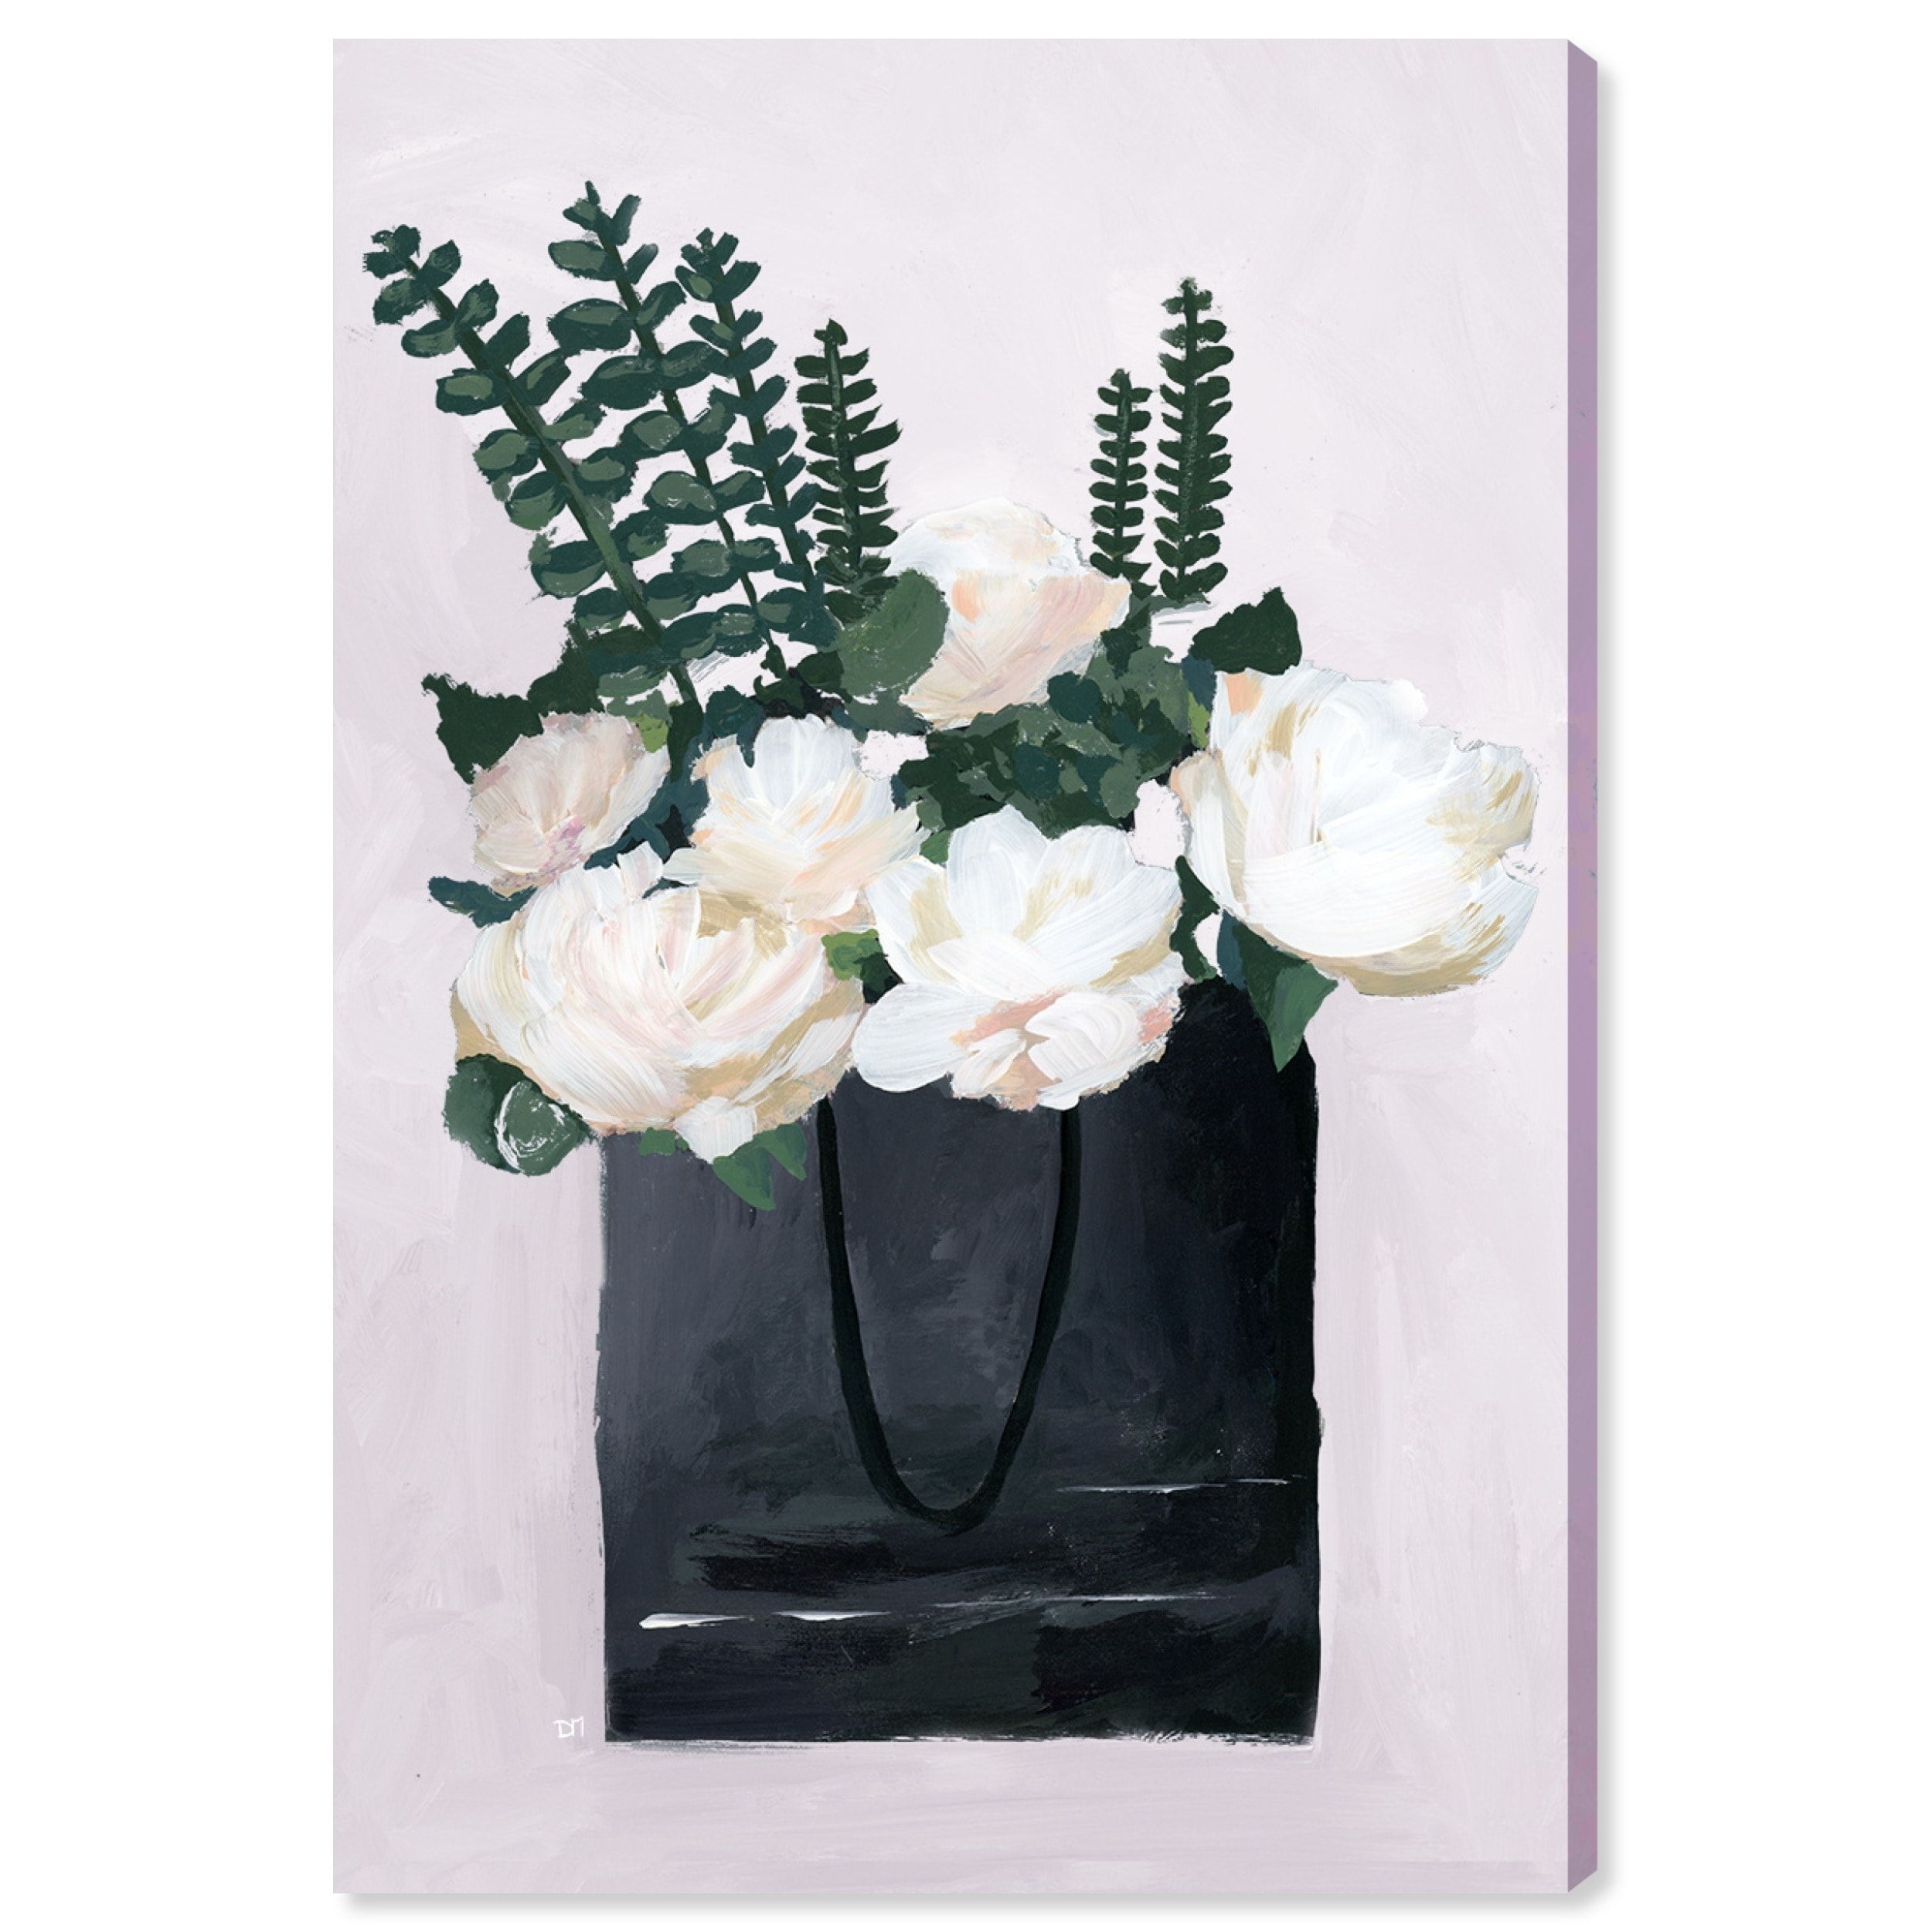 Oliver Gal 'Precious Finds Simple' Floral and Botanical Wall Art Canvas Print - White, Black